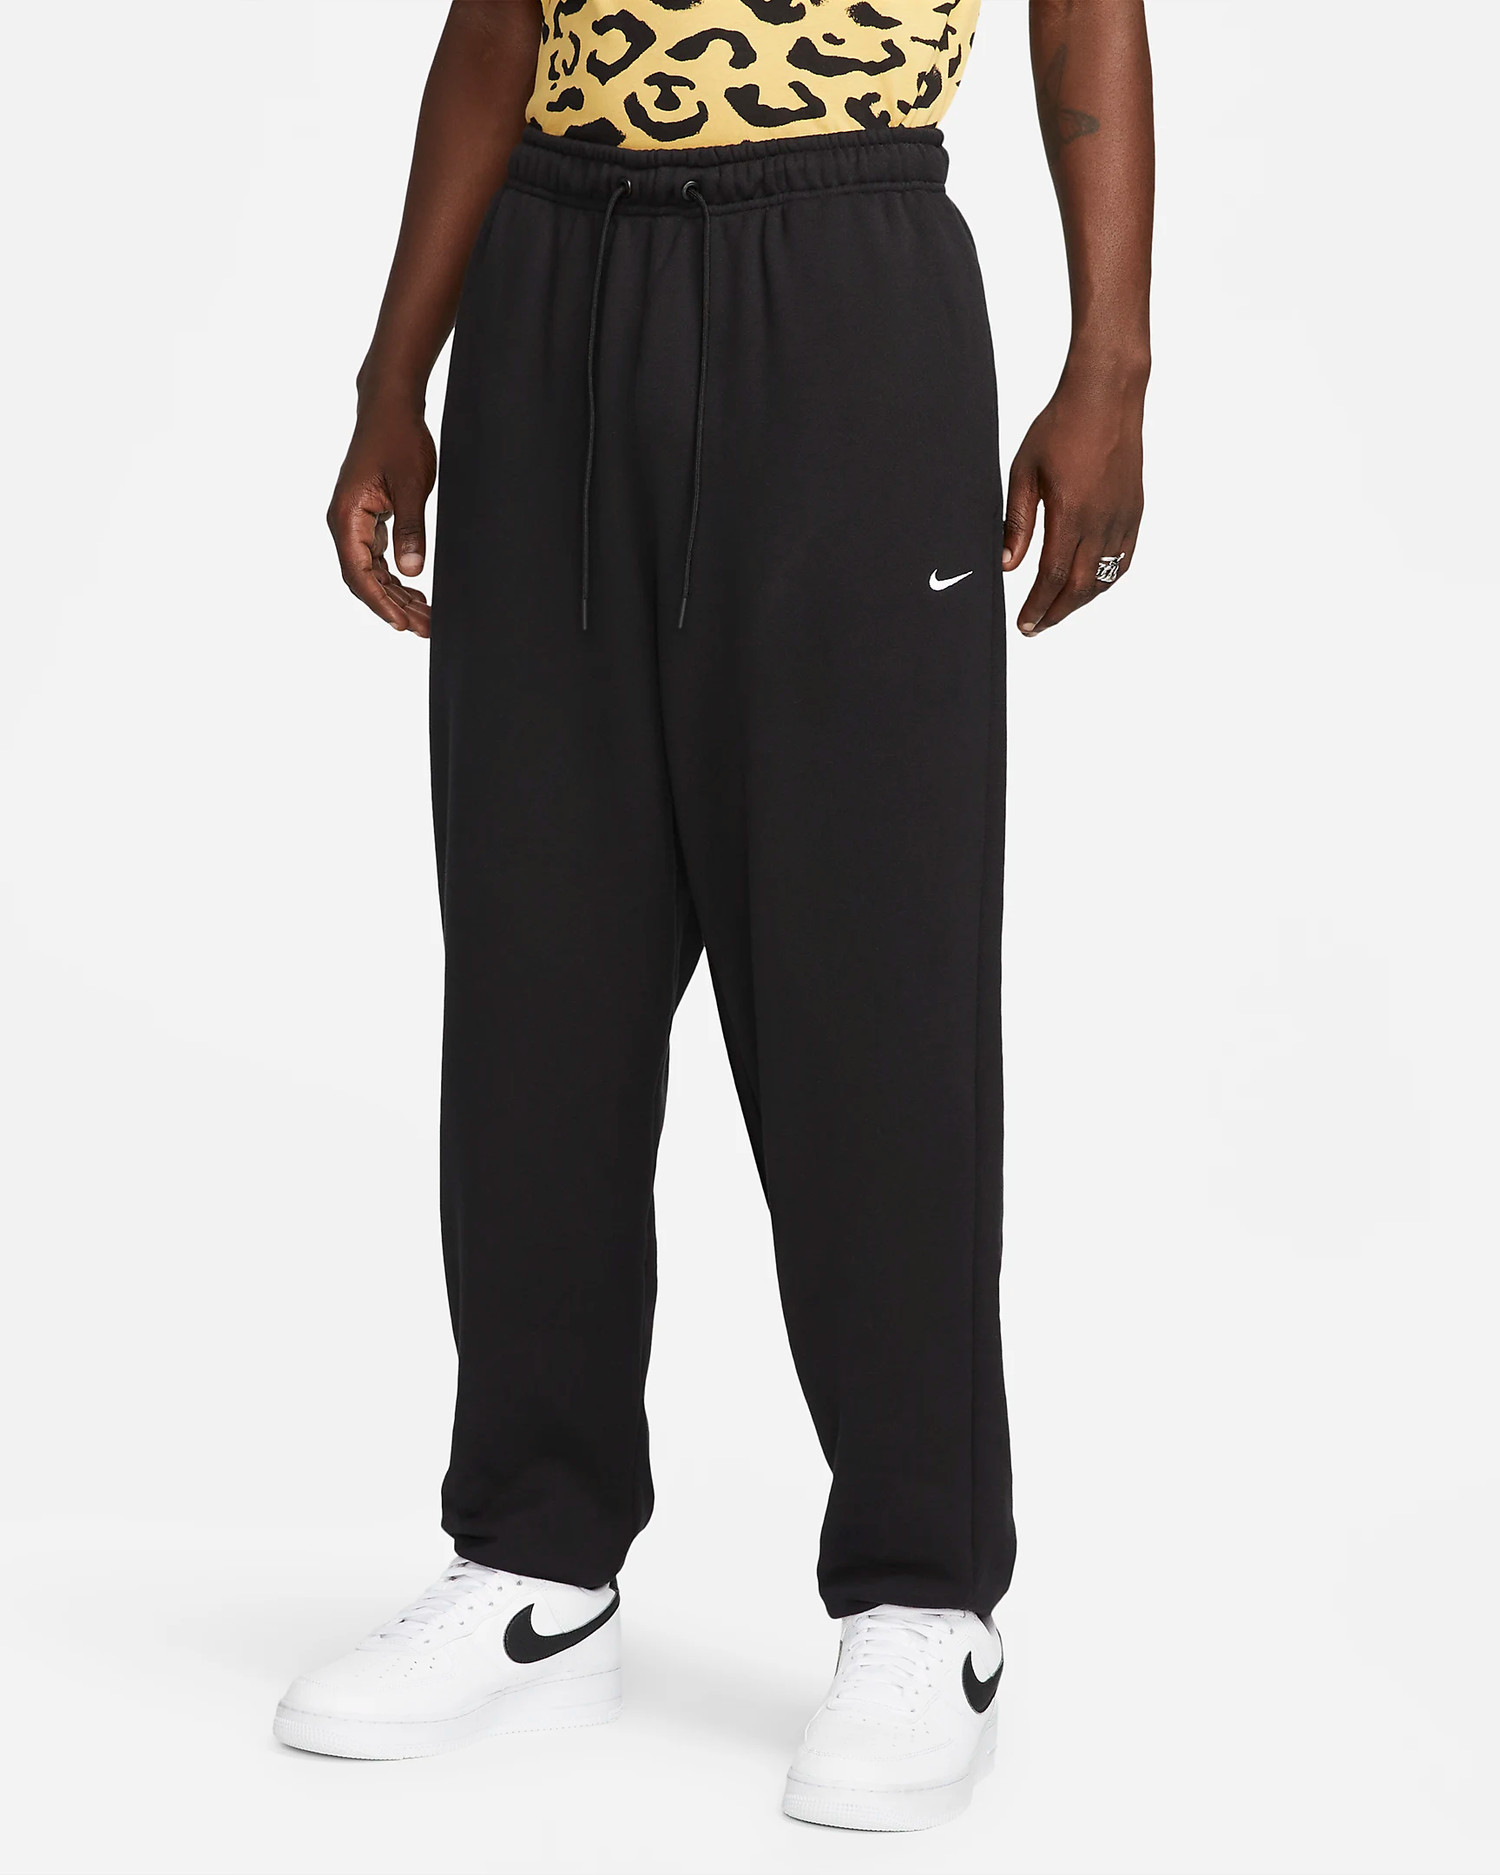 65% OFF the Nike Circa French Terry Sweatpants 